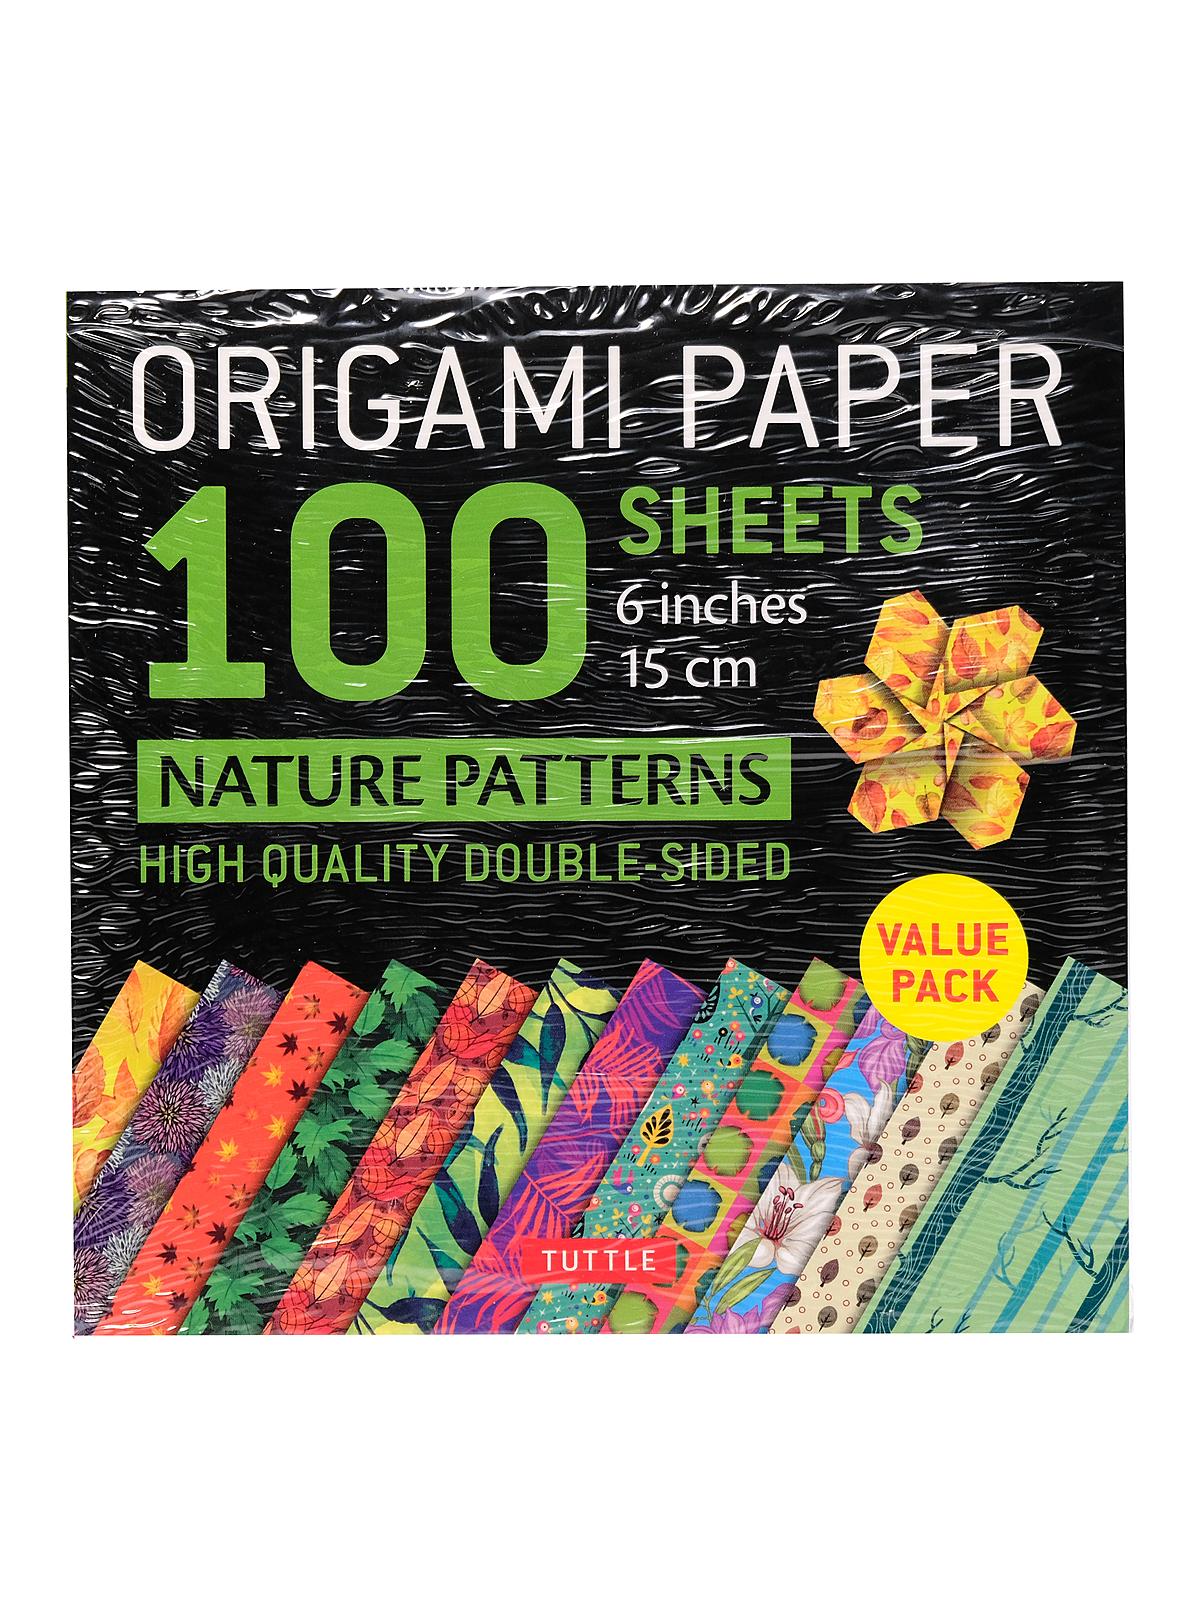 Origami Paper Nature Patterns 6 X 6, 100 Sheets